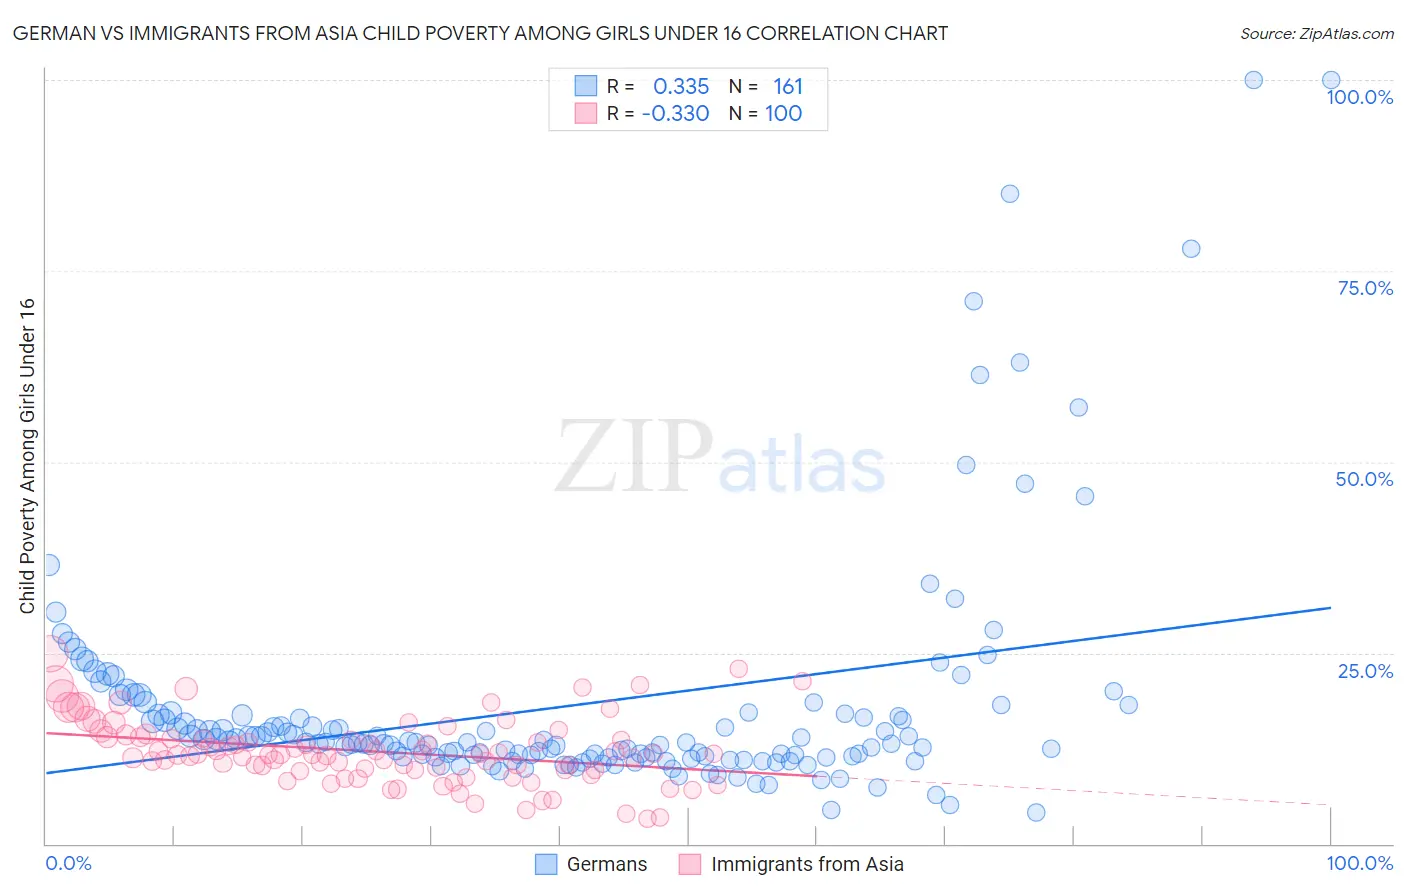 German vs Immigrants from Asia Child Poverty Among Girls Under 16